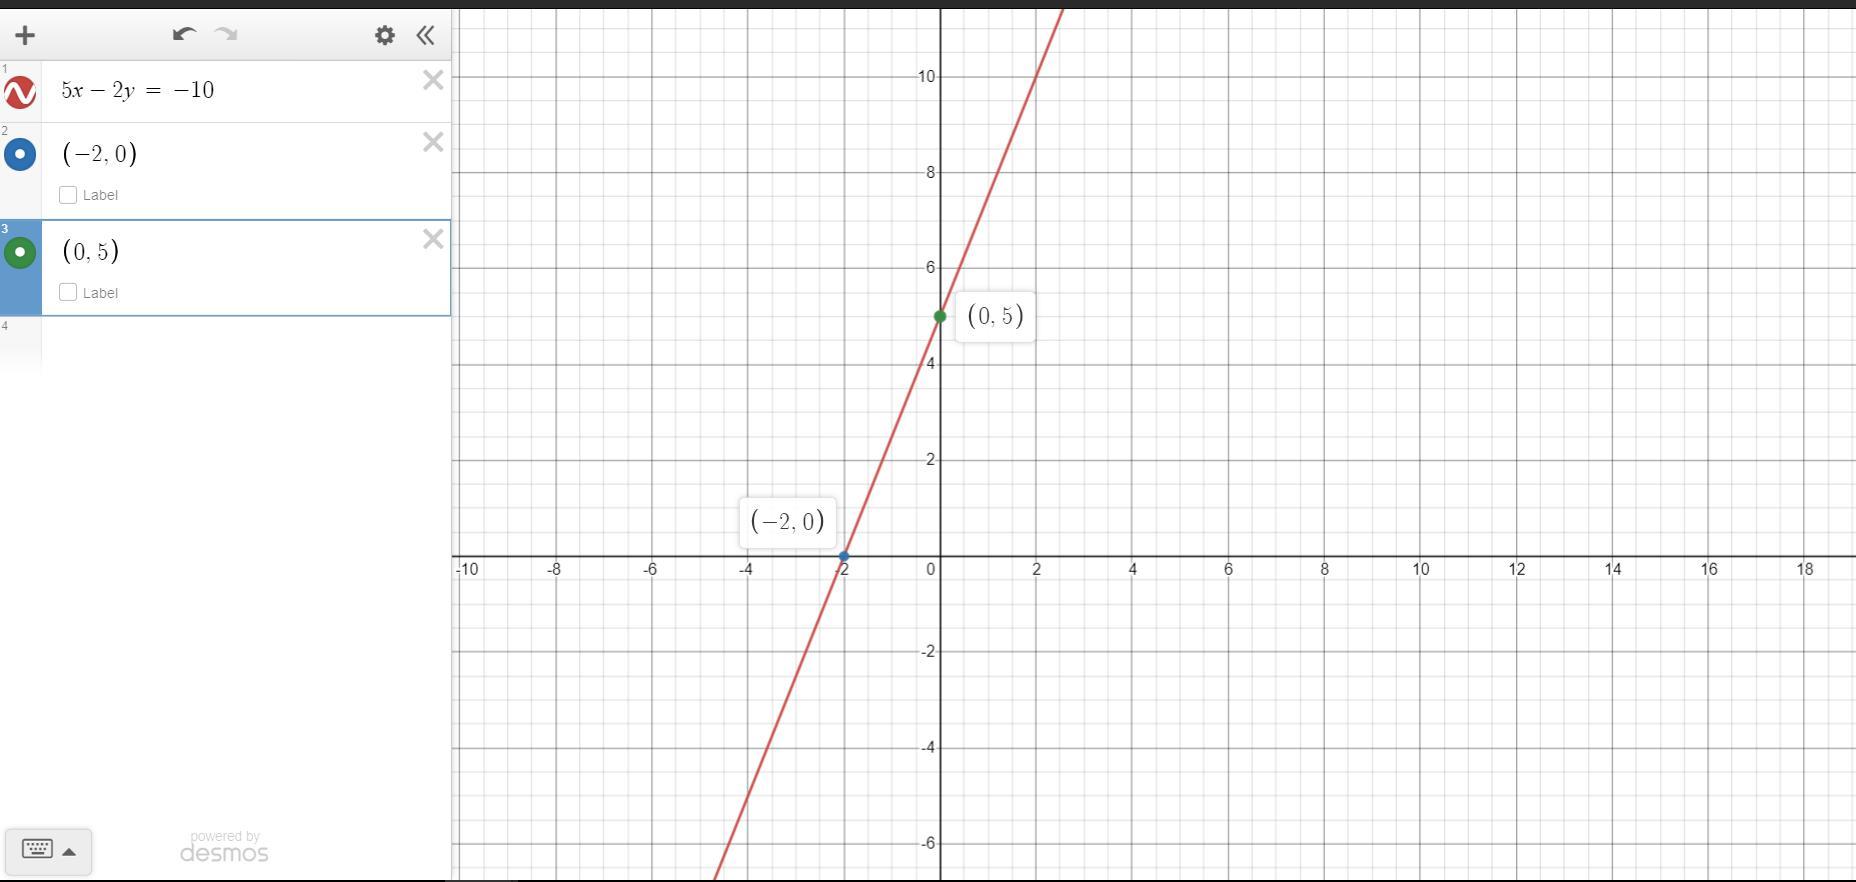 Find And Graph The Intercepts Of The Following Linear Equation:5x-2y=-10